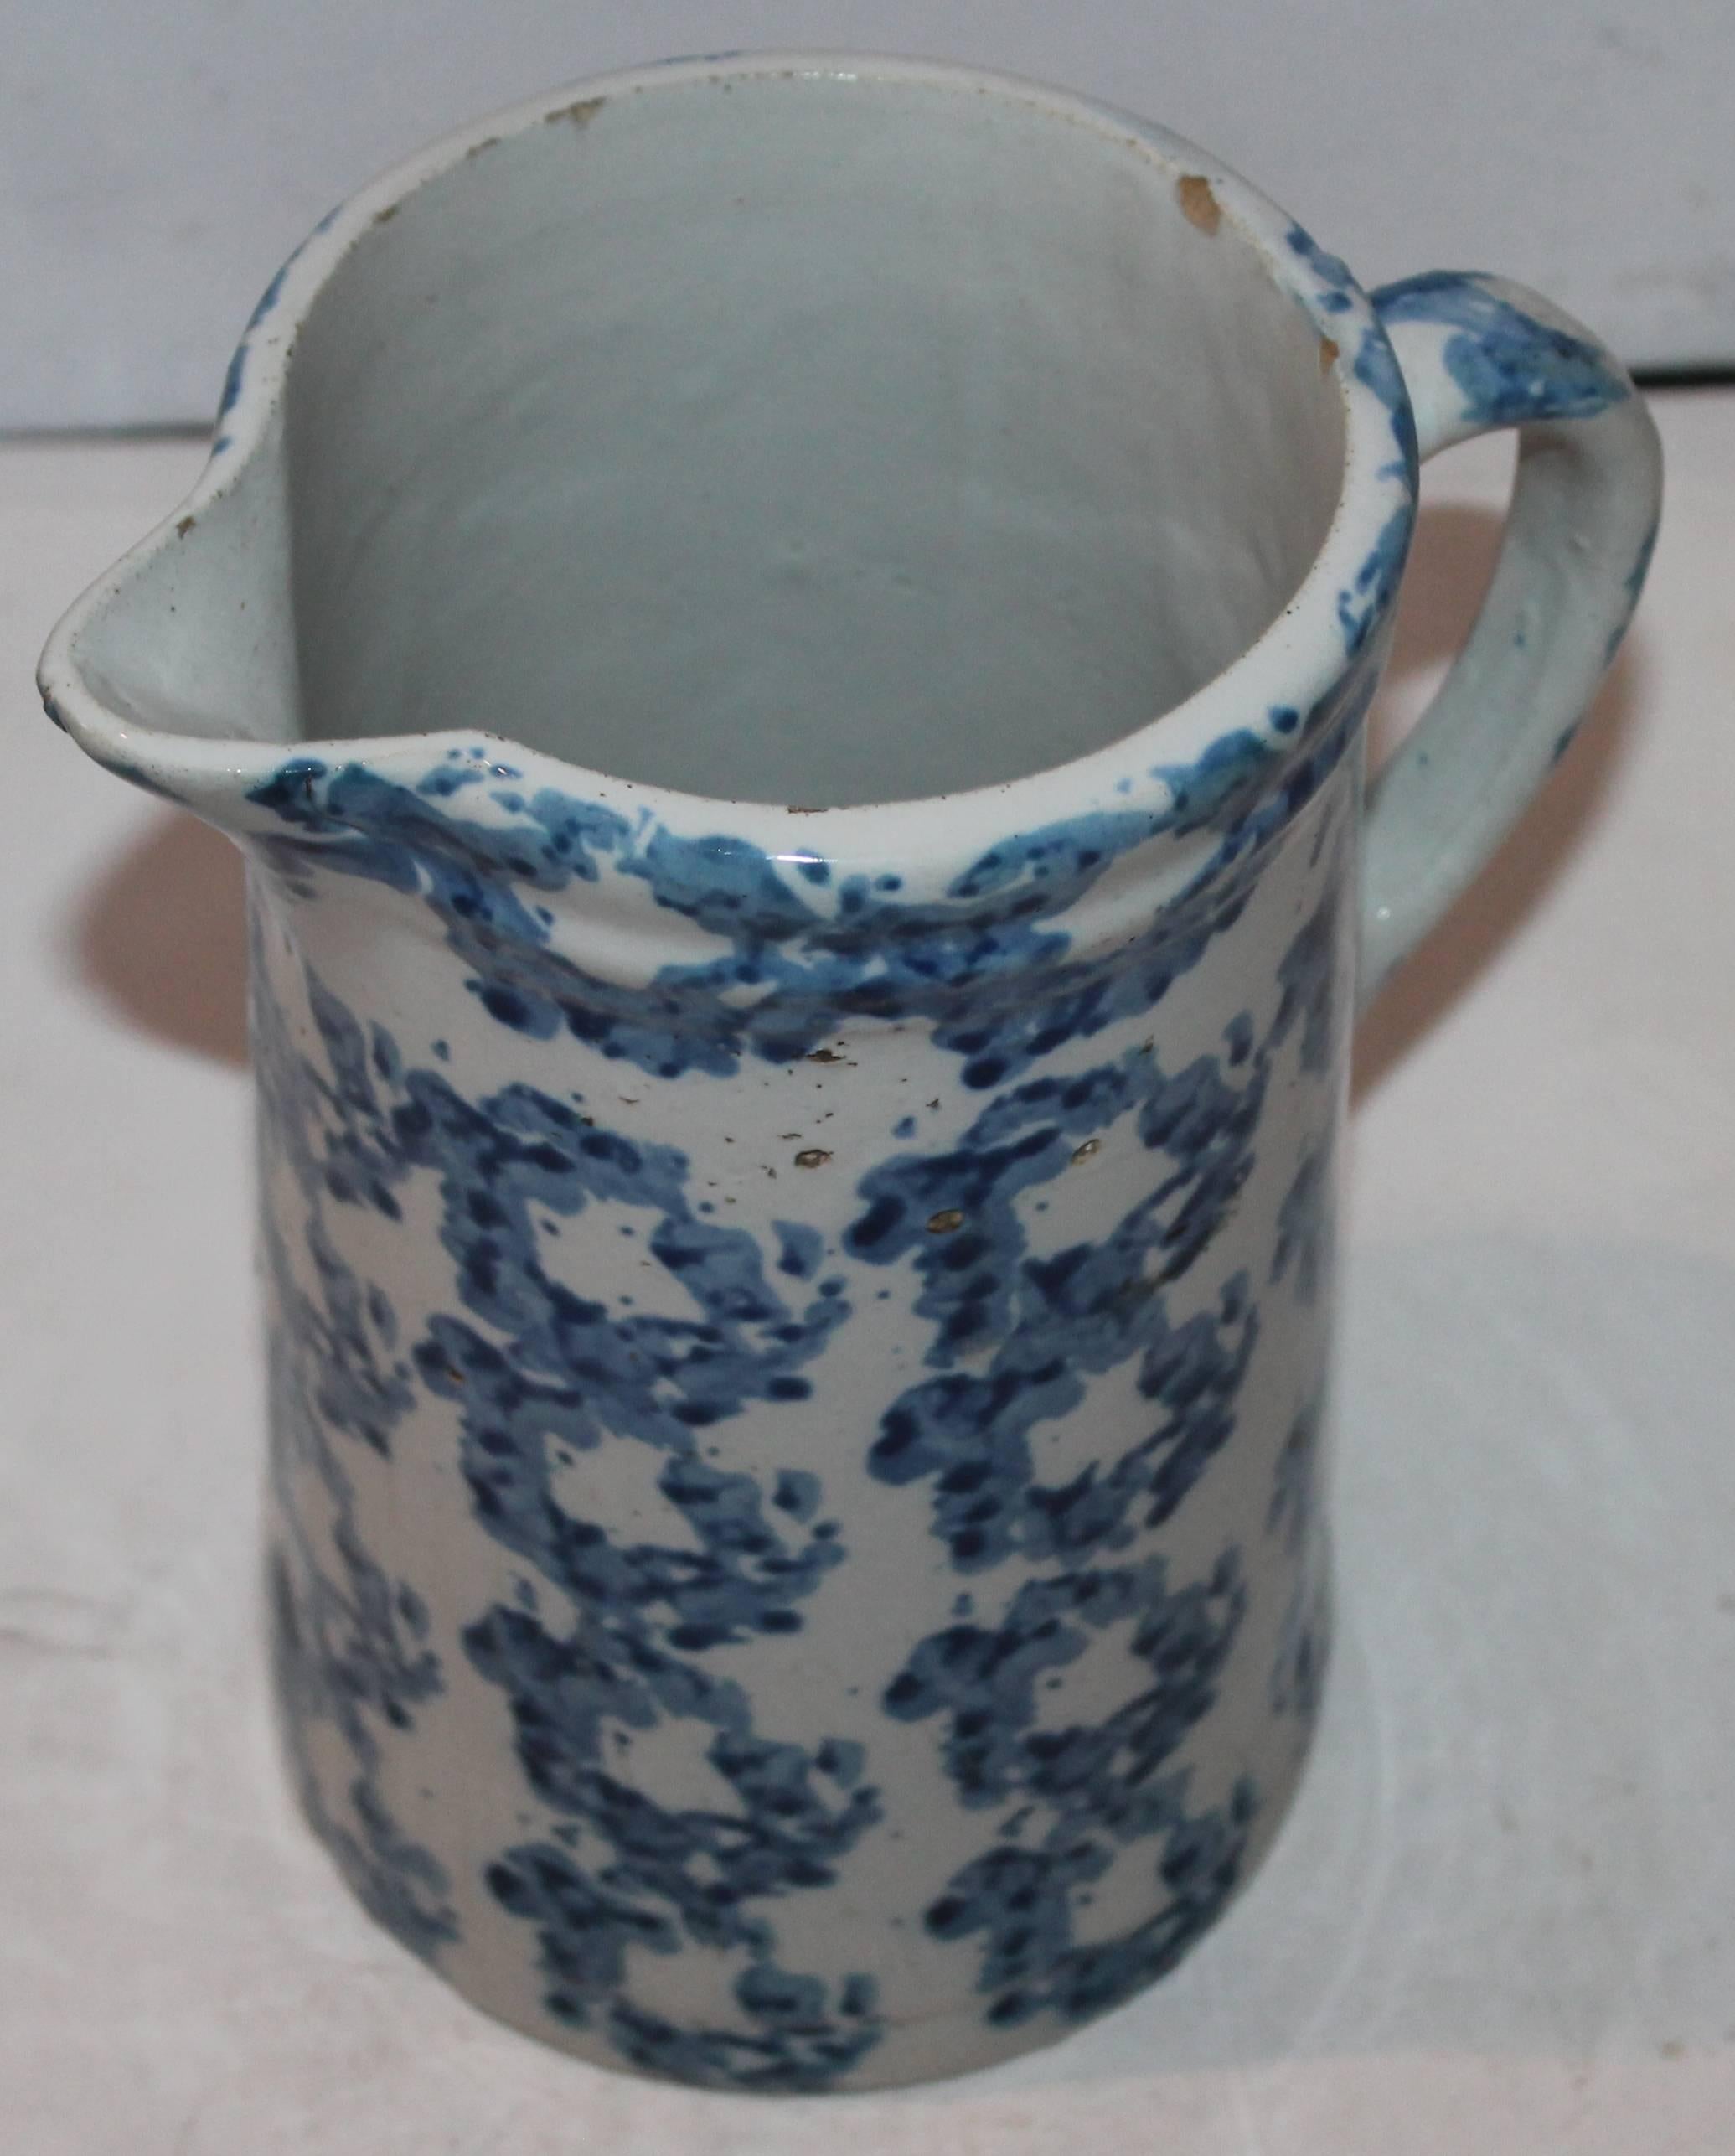 This wonderful design spongeware pottery pitcher is in fine condition. This stylized spongeware is always more desired.